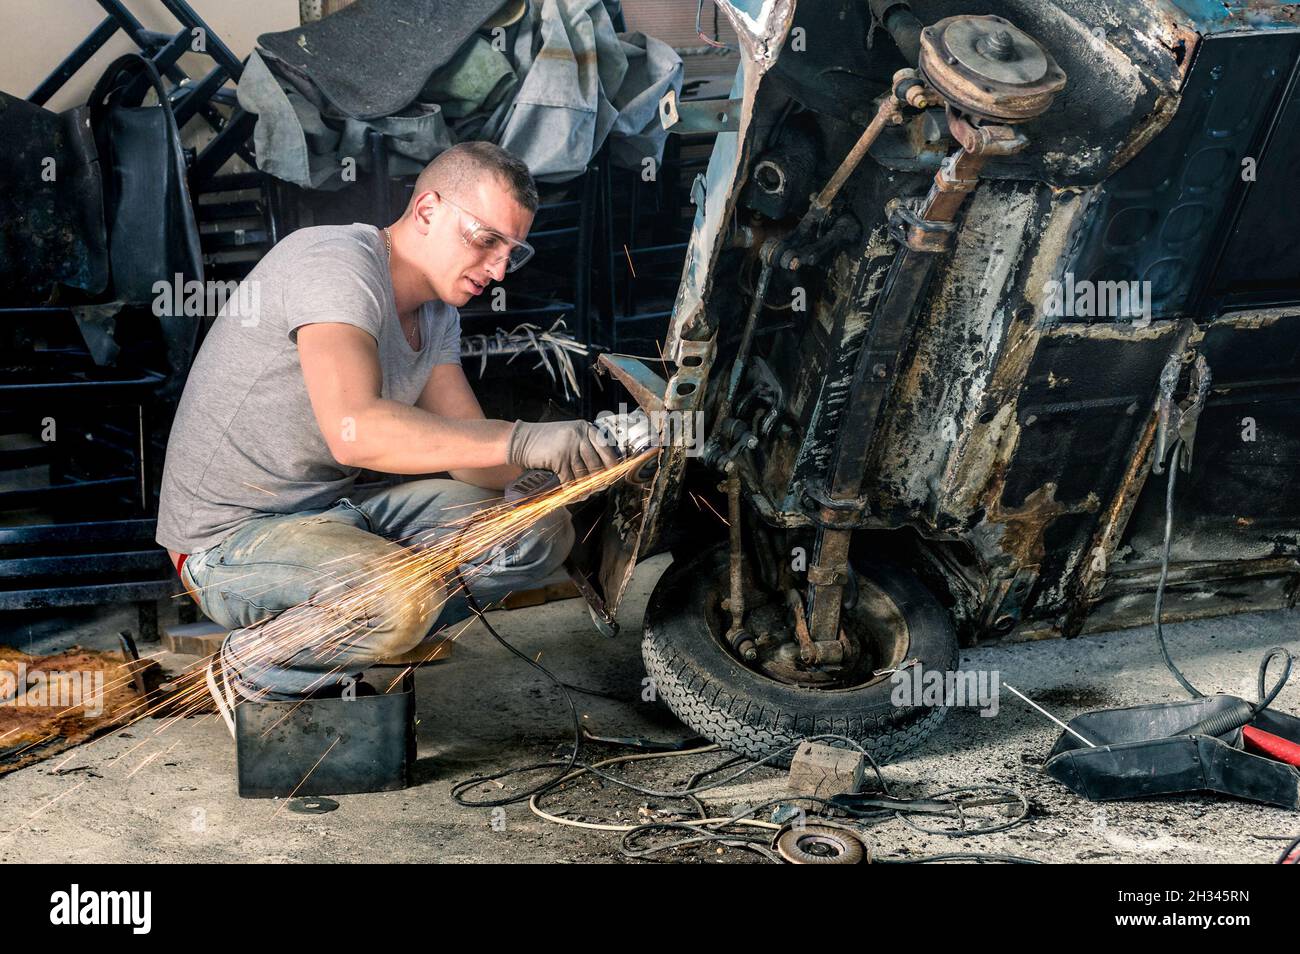 Young mechanical worker repairing an old vintage car body in messy garage Stock Photo